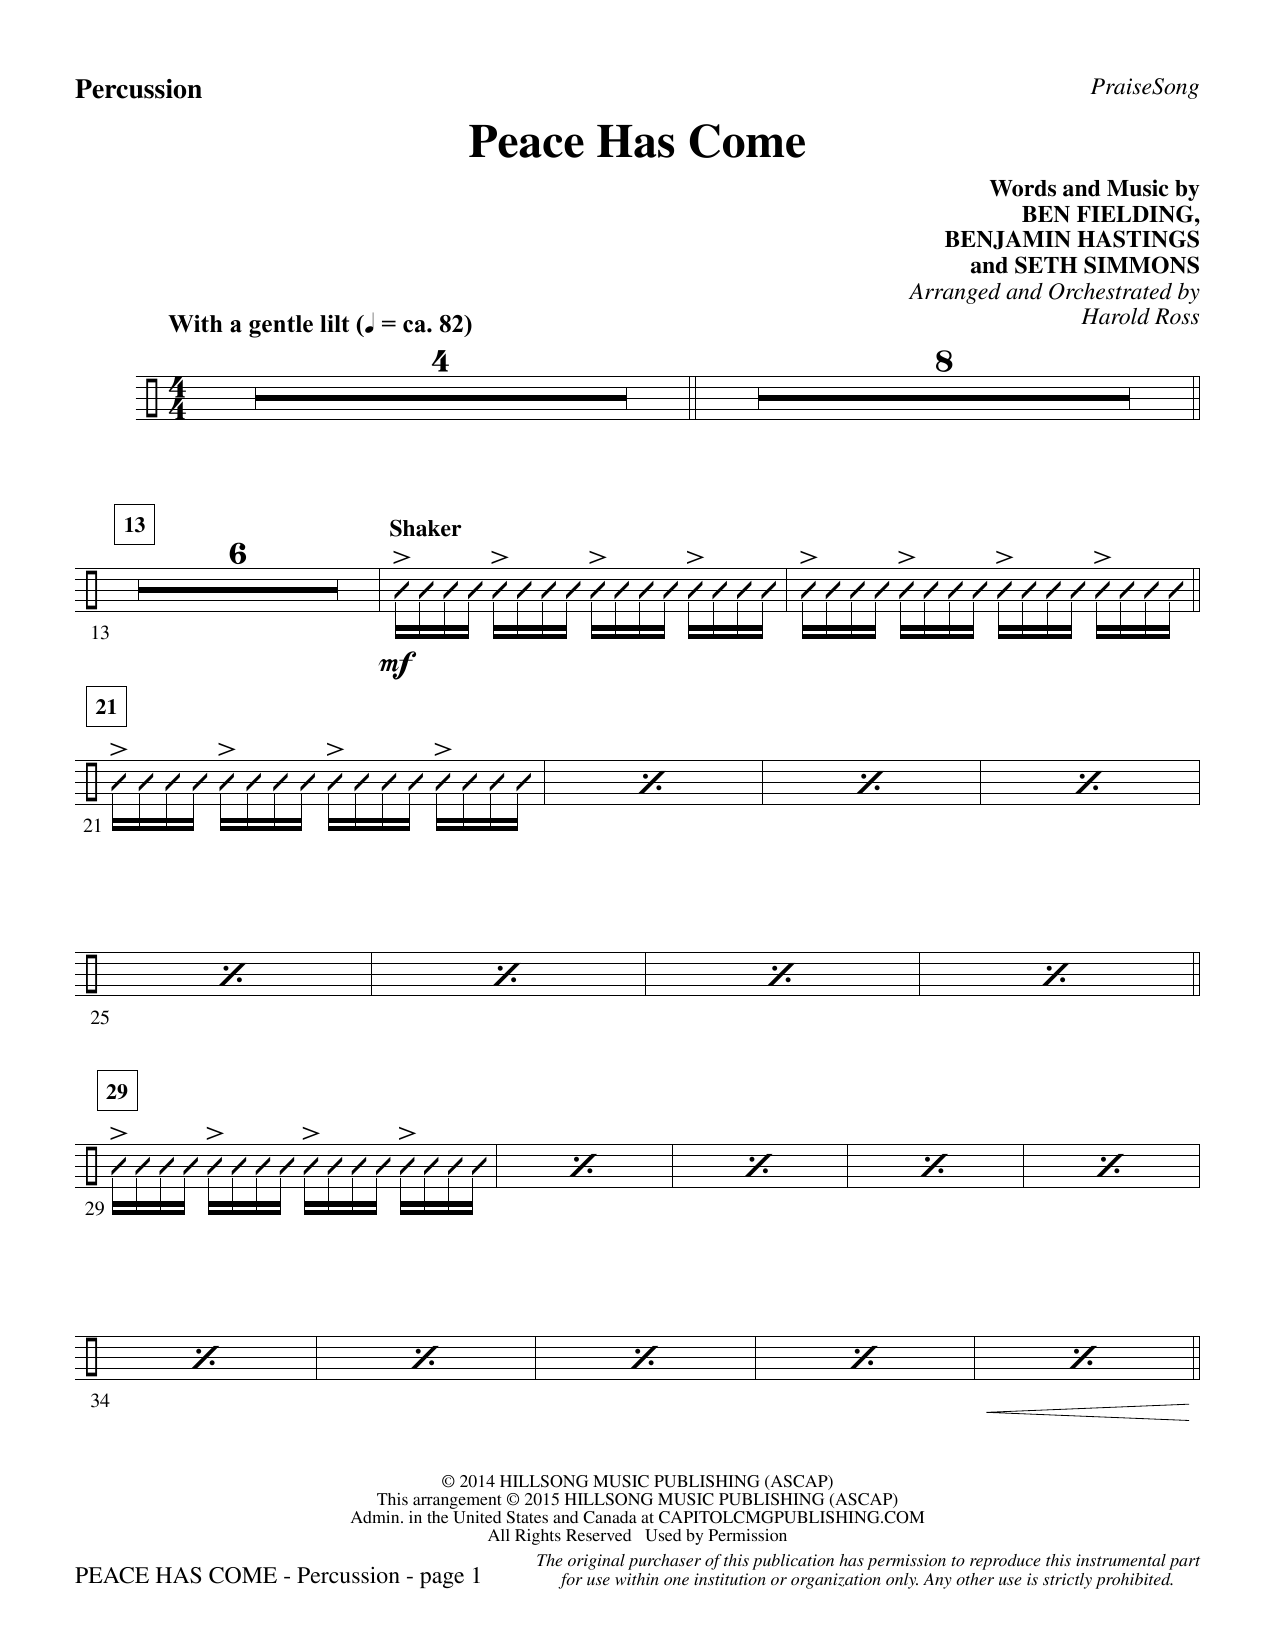 Harold Ross Peace Has Come - Percussion sheet music notes and chords. Download Printable PDF.